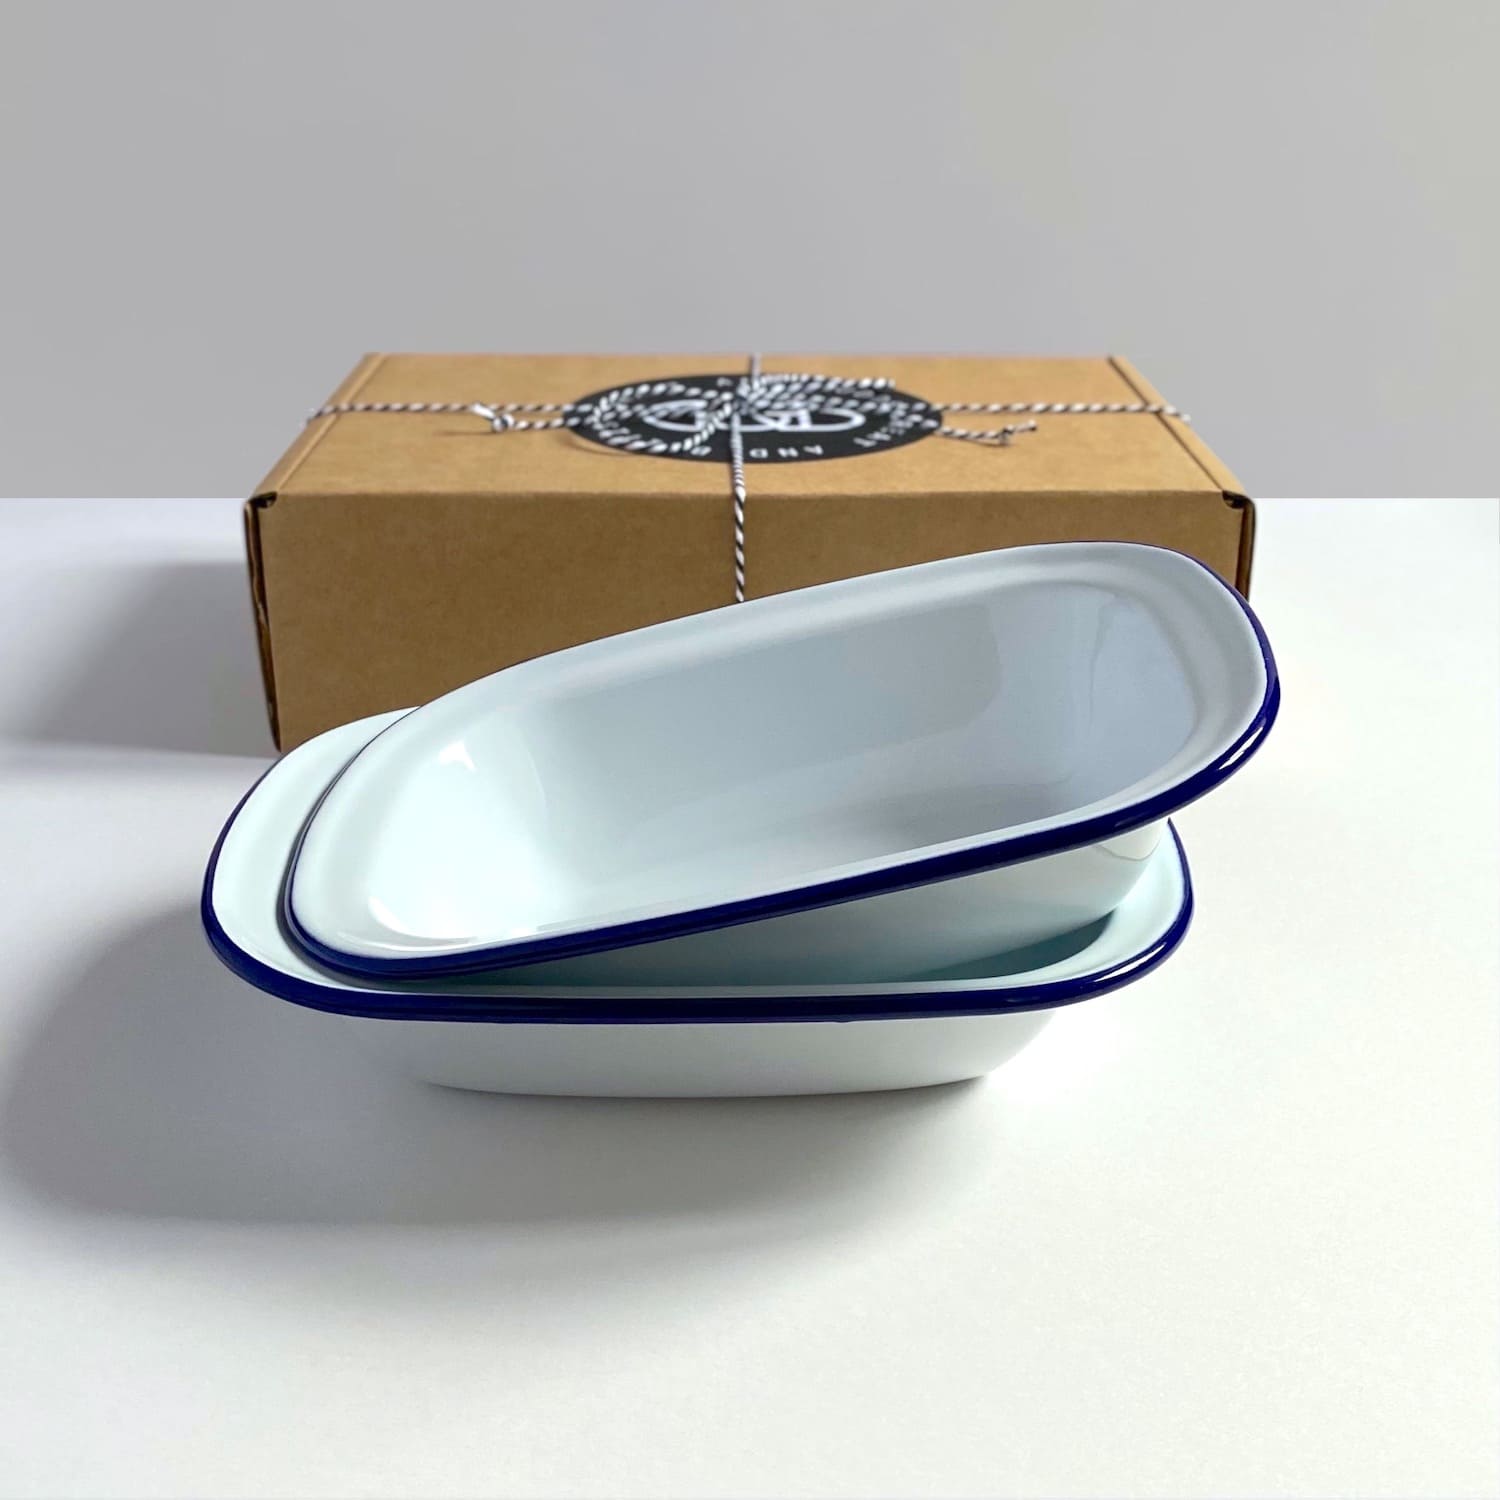 Pair of Blue Rimmed White Enamel Pie Dishes - Small